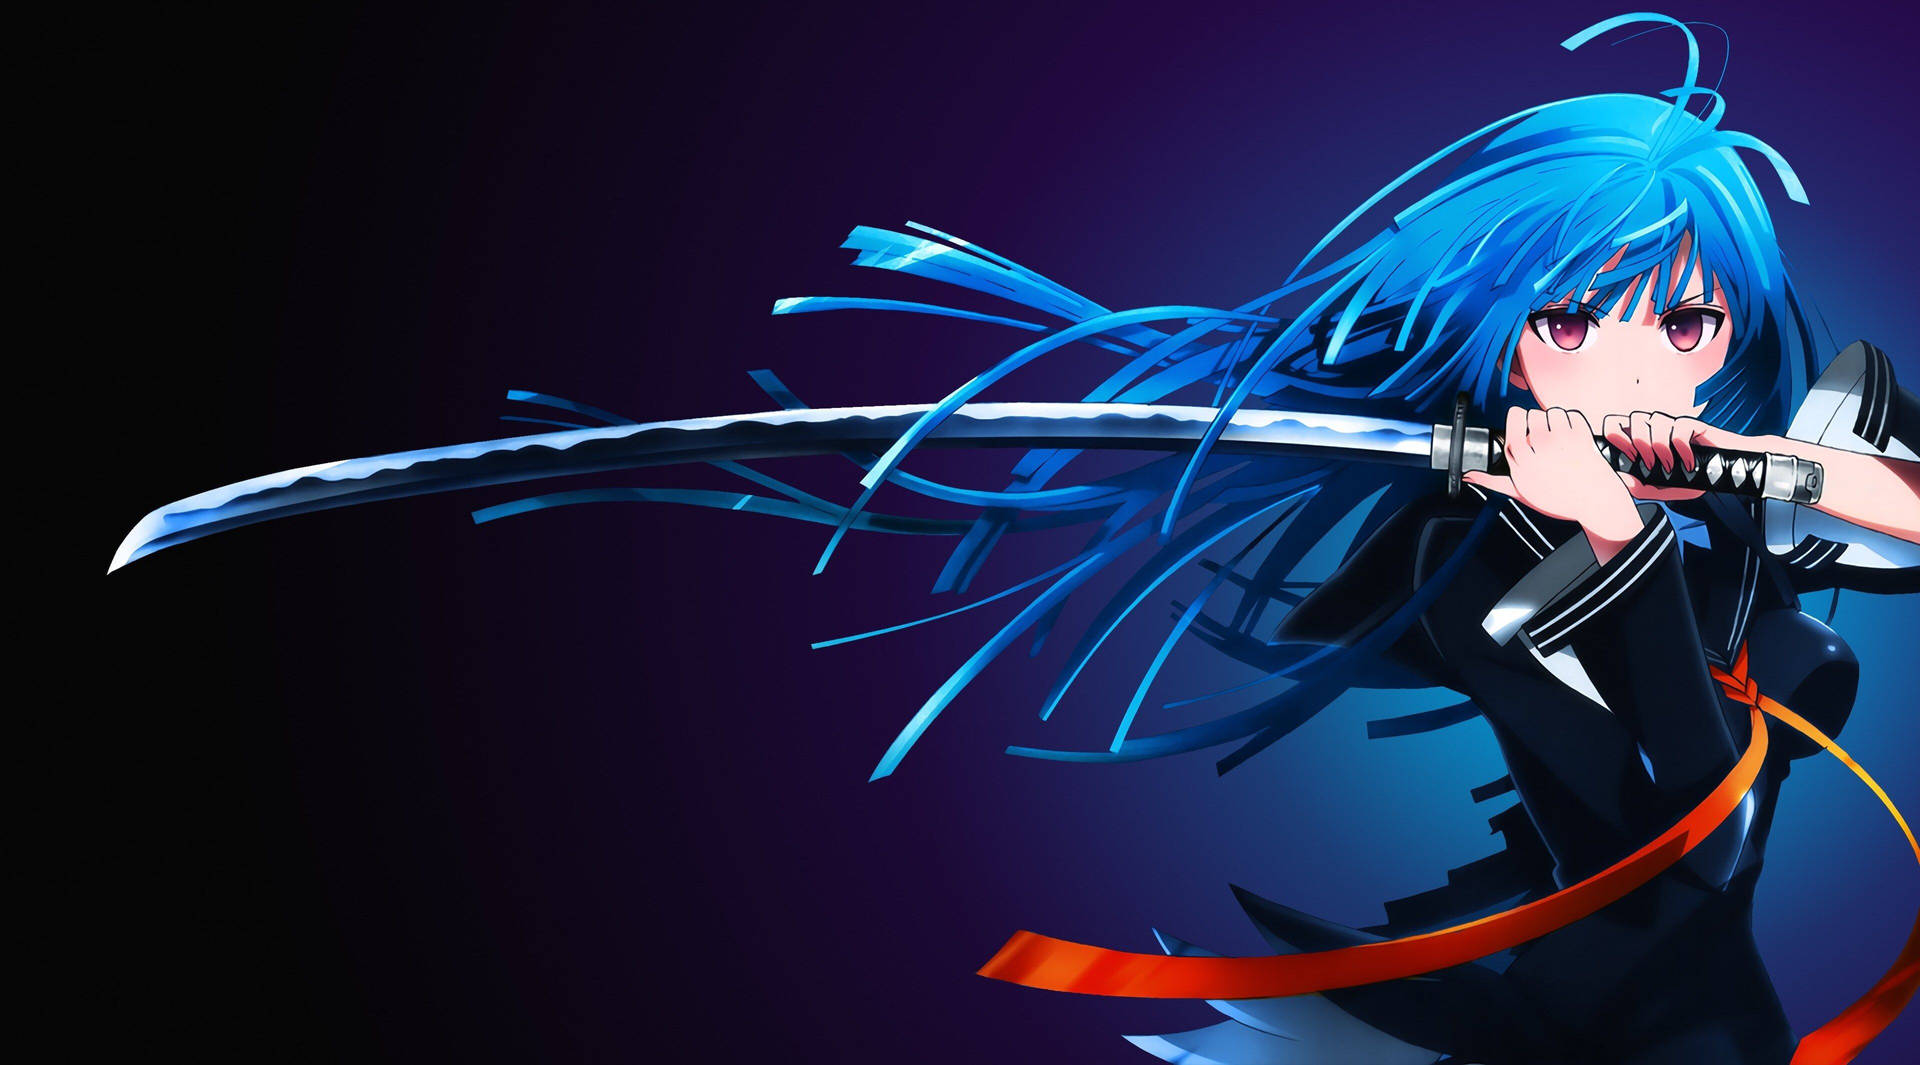 Free Anime Live Wallpaper Downloads, [100+] Anime Live Wallpapers for FREE  